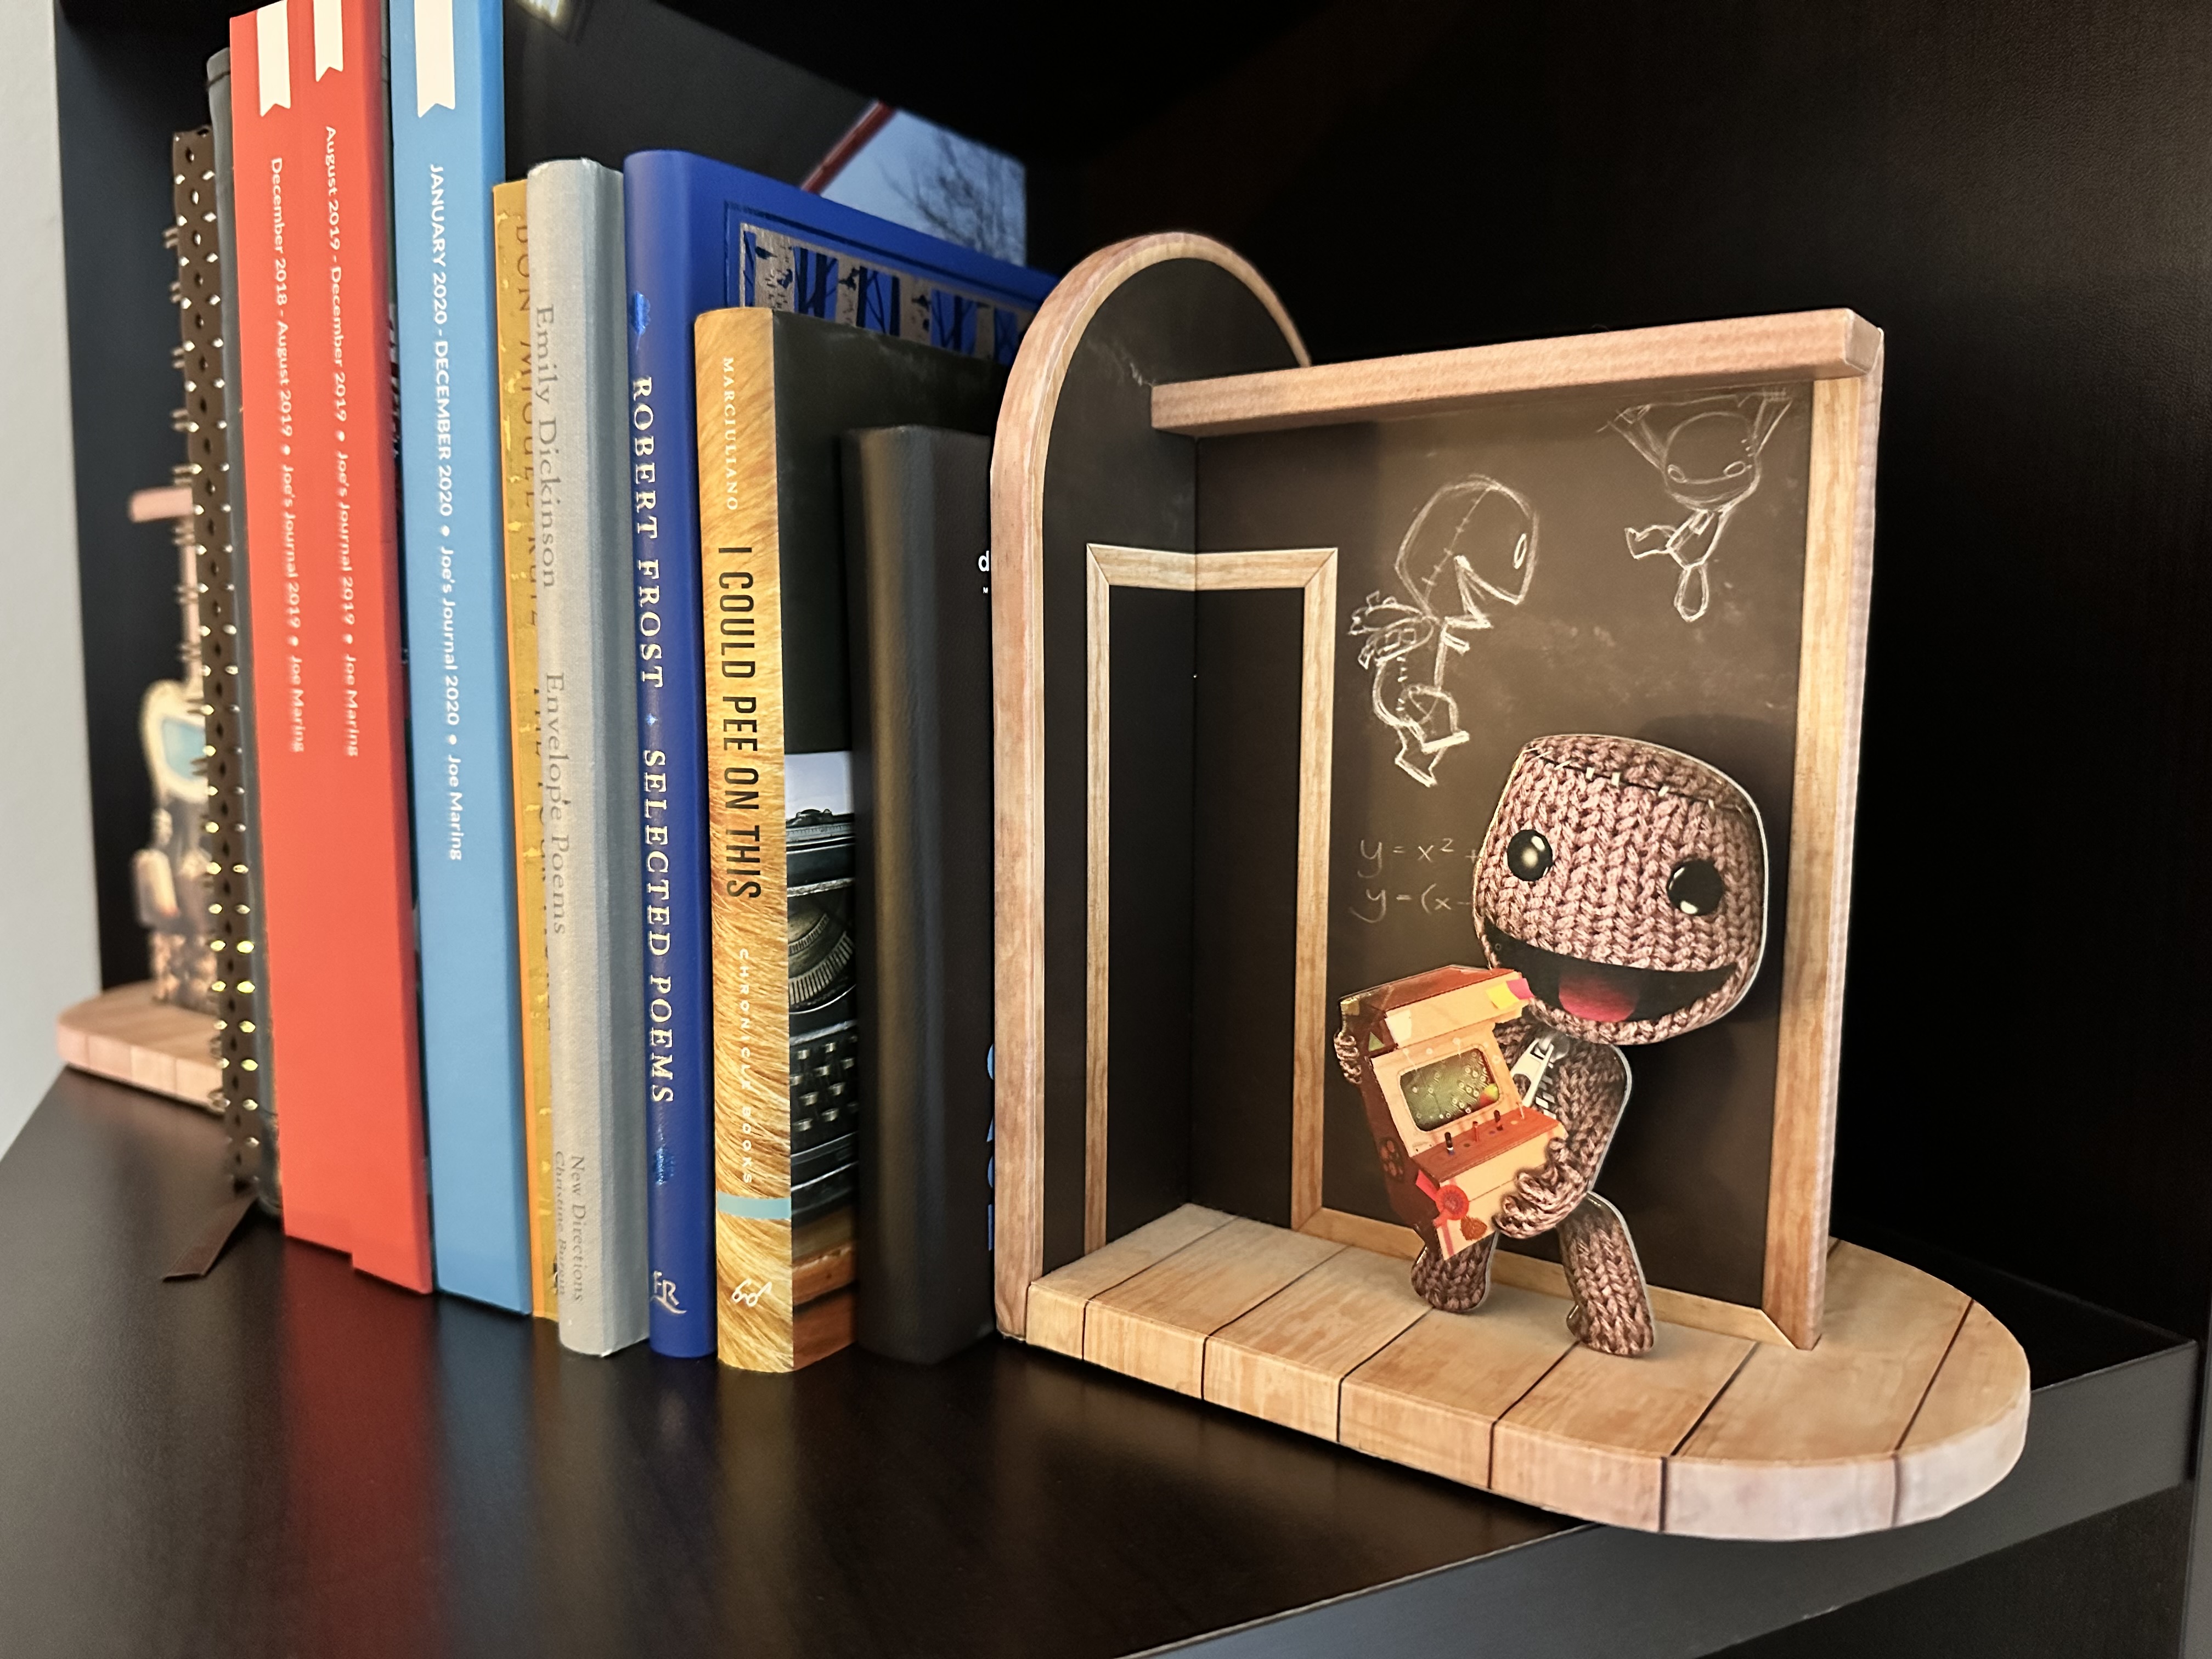 Photo of books standing up with LittleBigPlanet bookends.